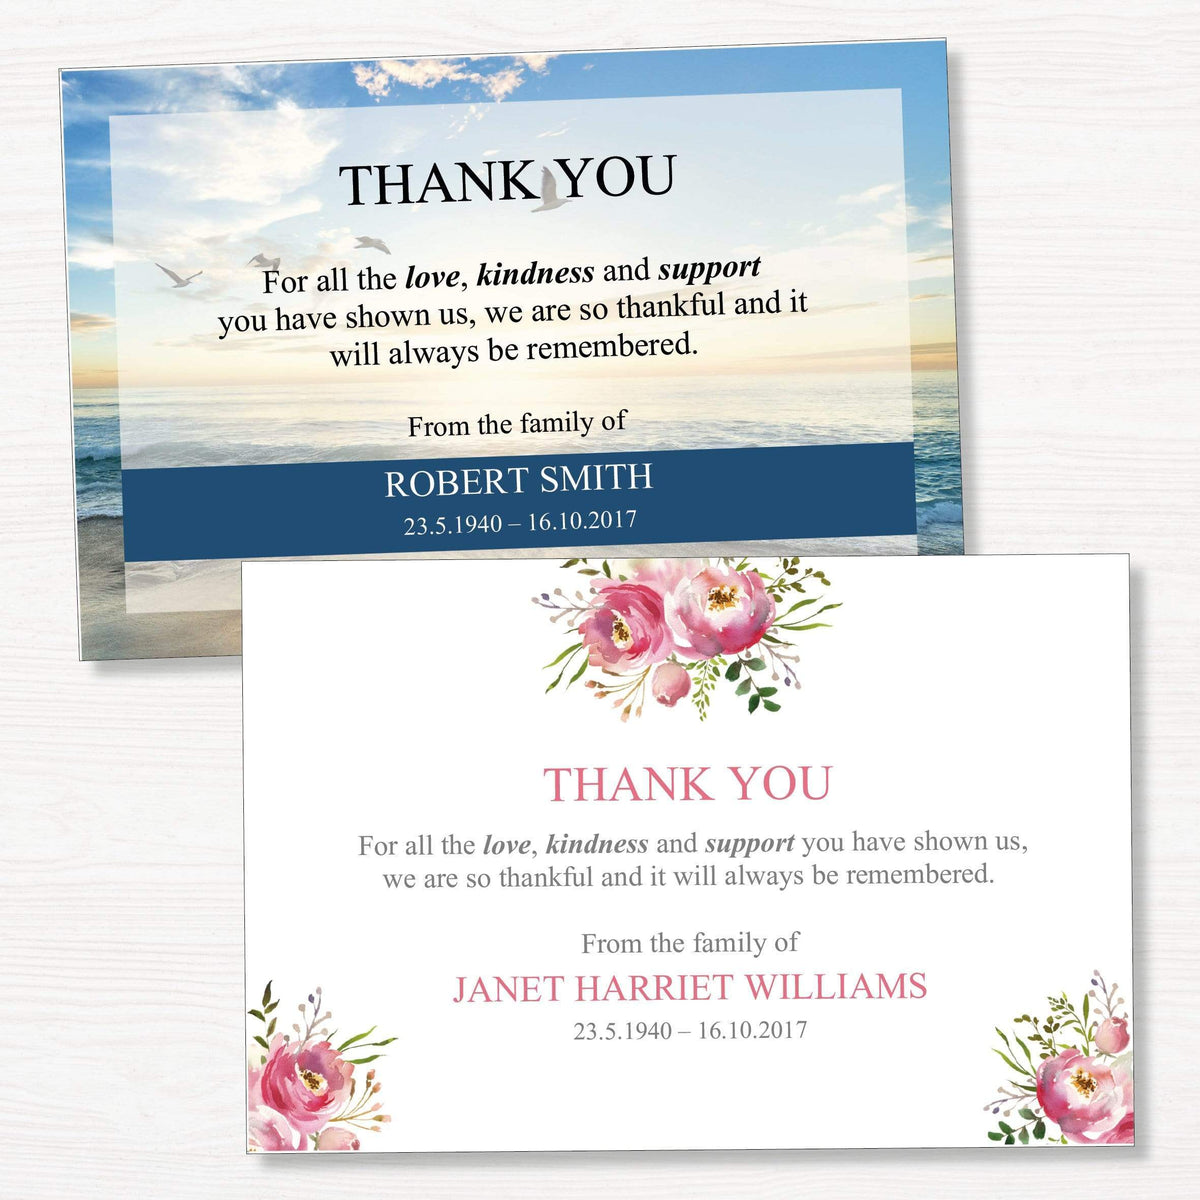 Funeral Thank You Cards Funeral Templates